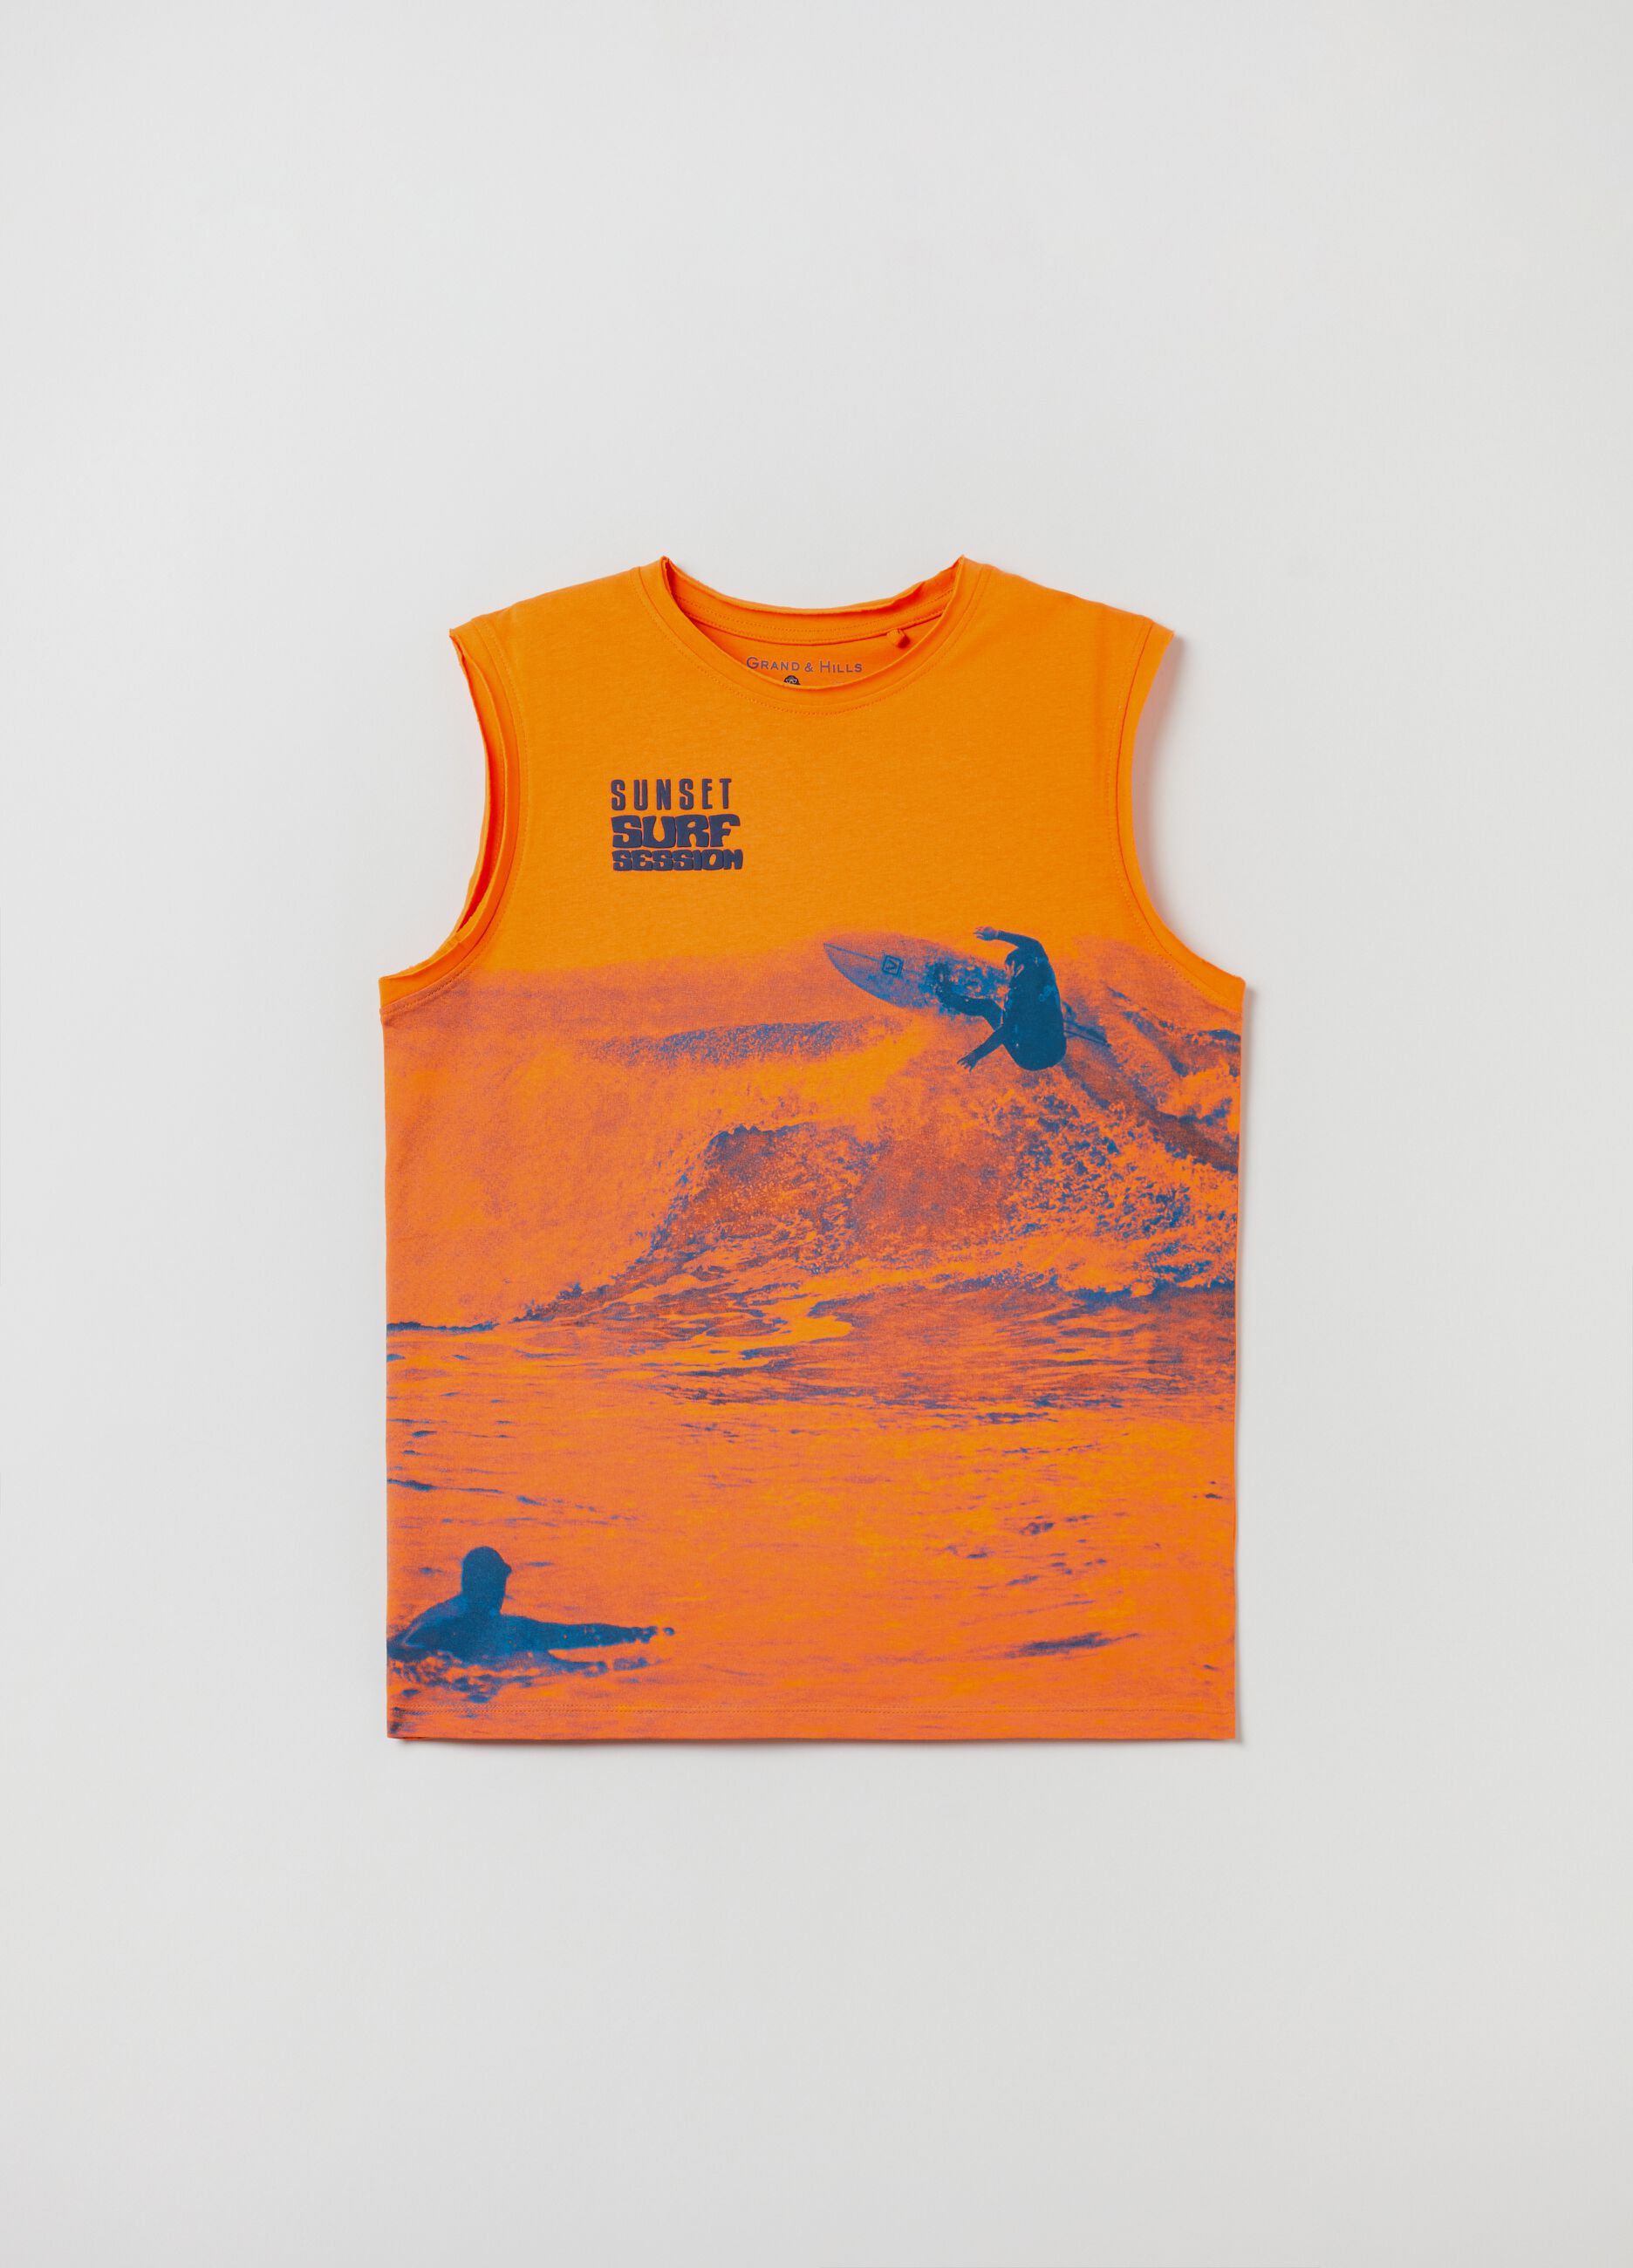 Grand&Hills tank top with surf print